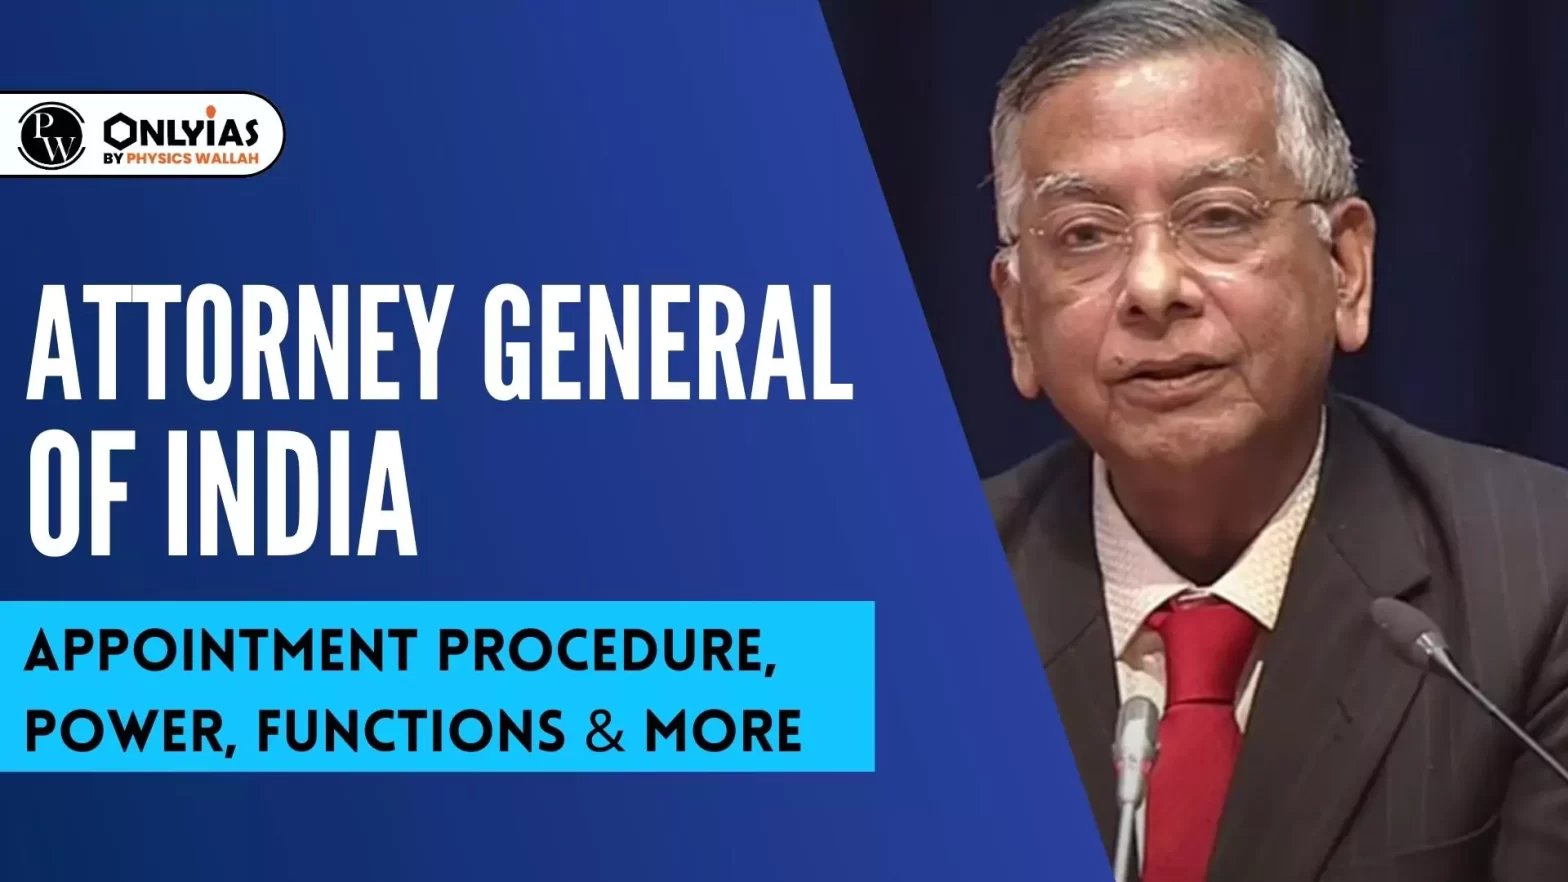 Attorney General of India: Appointment Procedure, Power, Functions & More